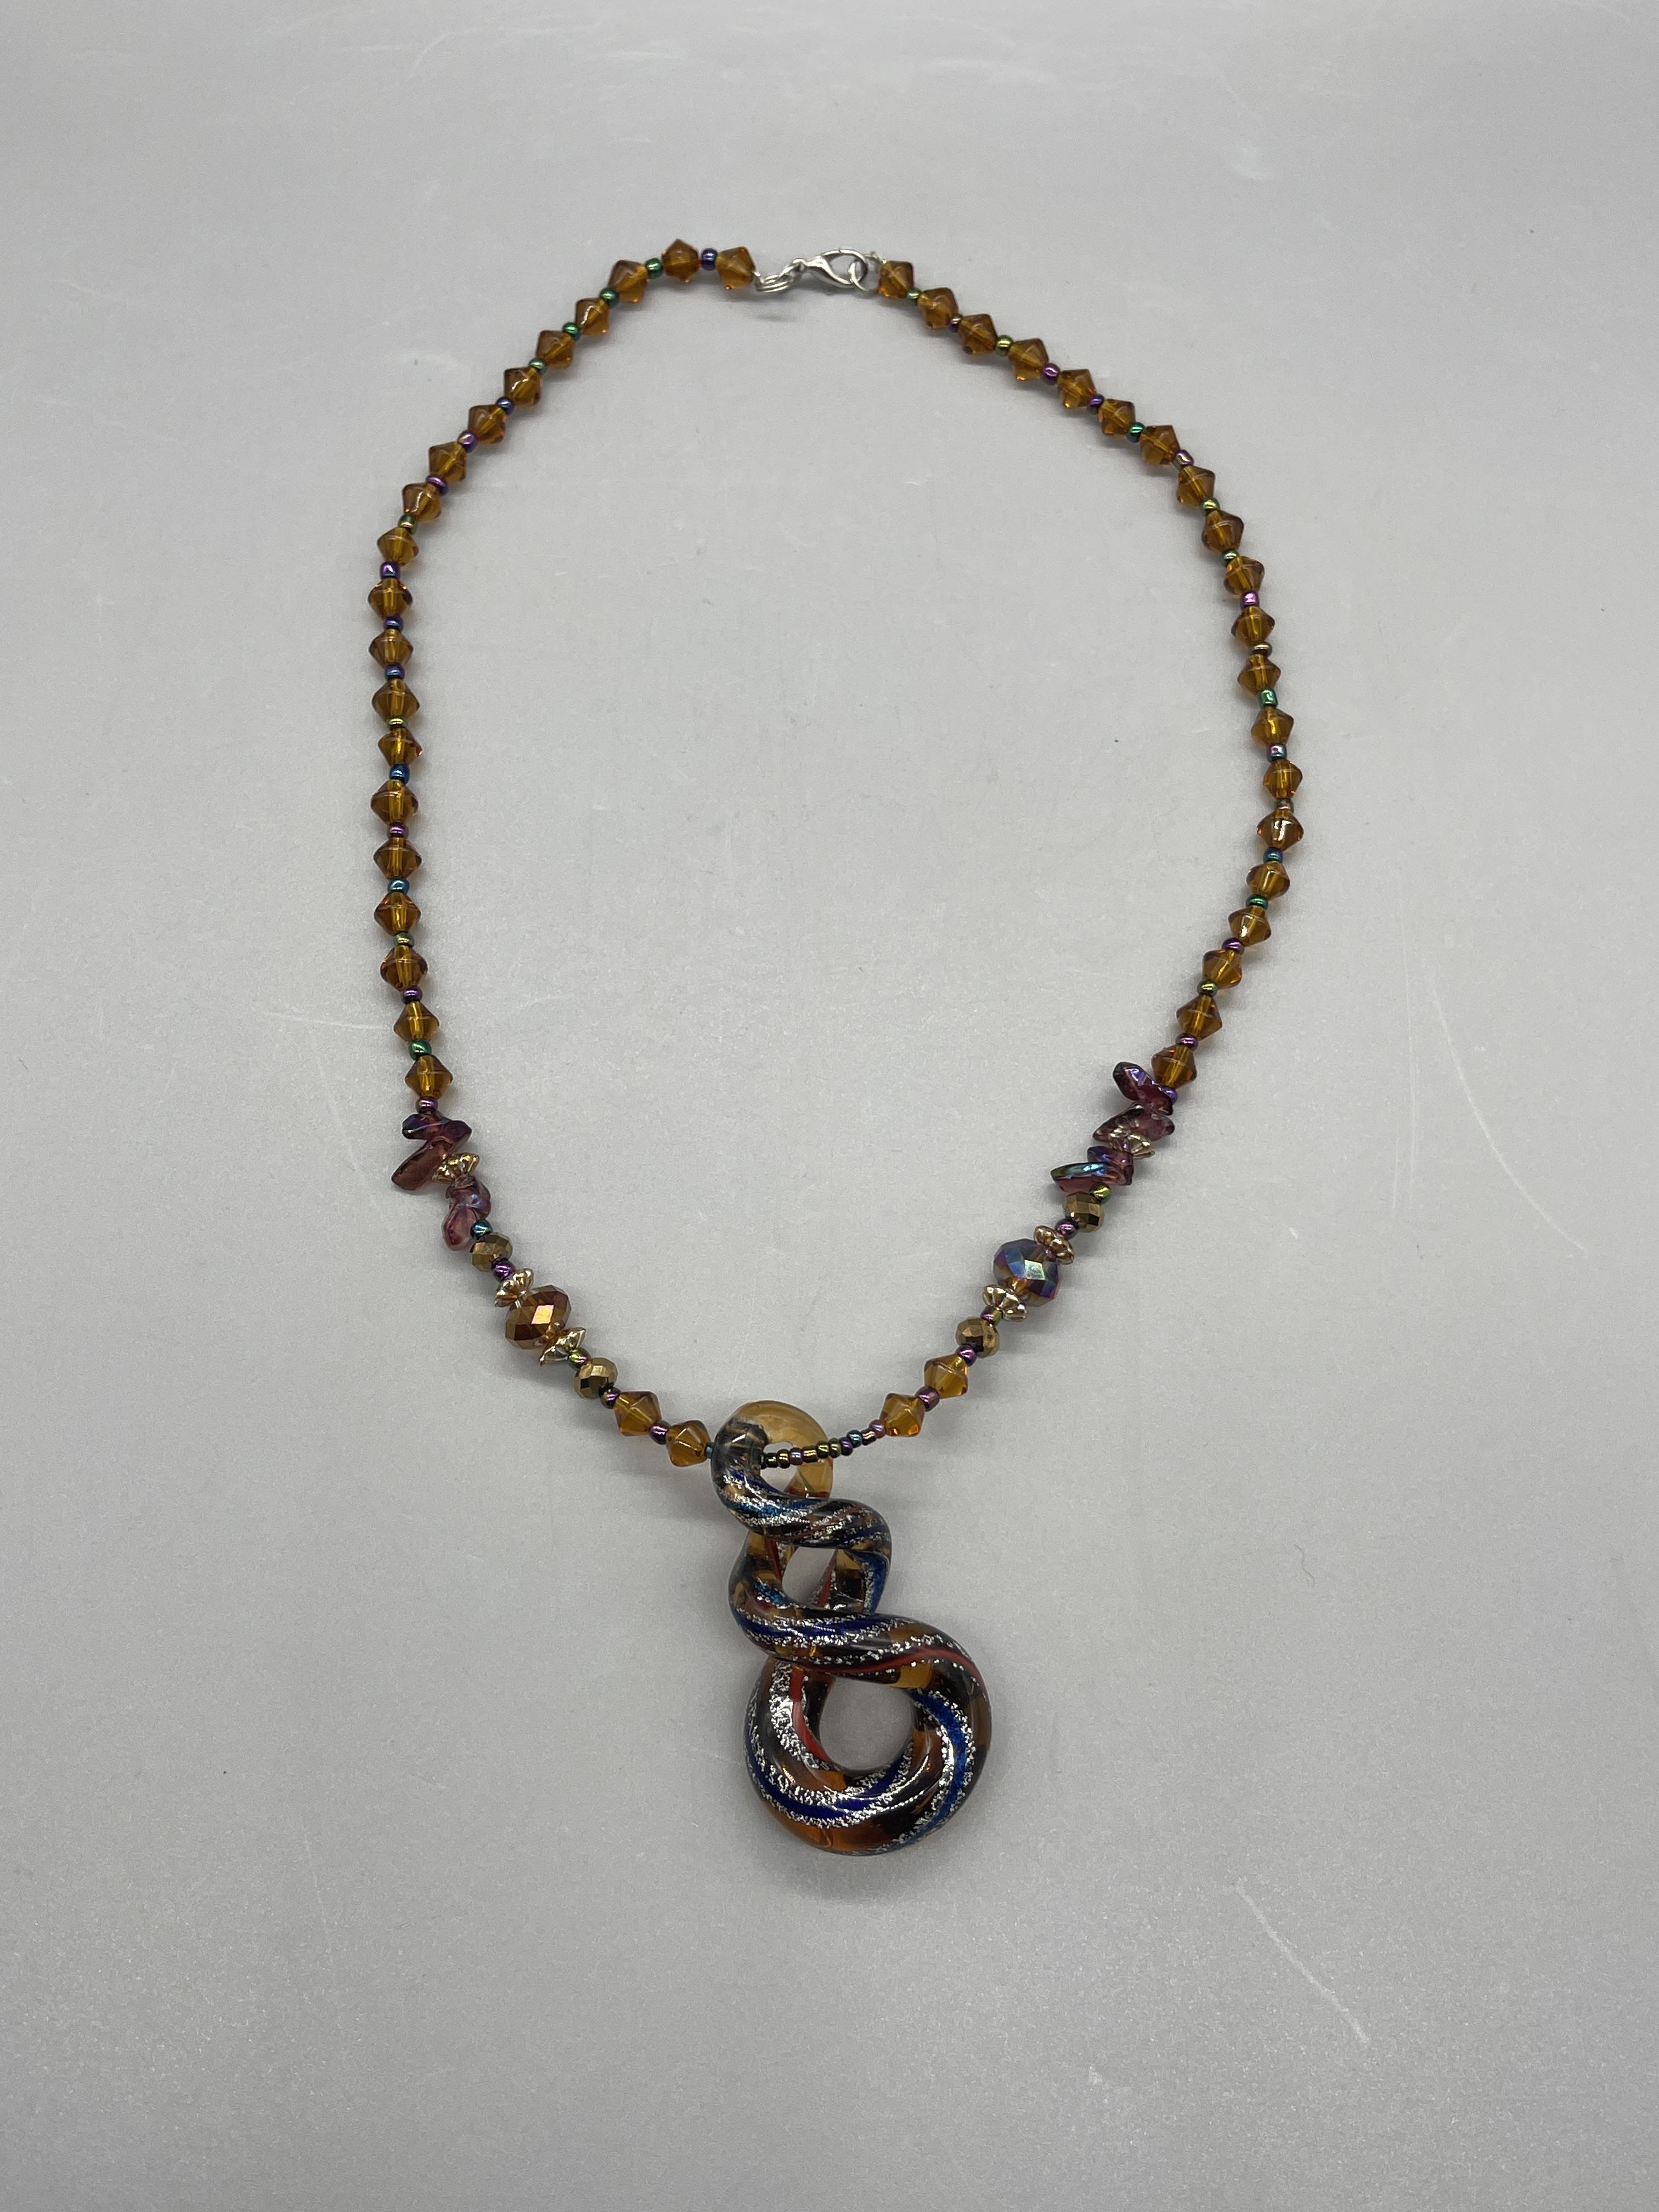 MURANO Unusual blown glass necklace - Image 2 of 6